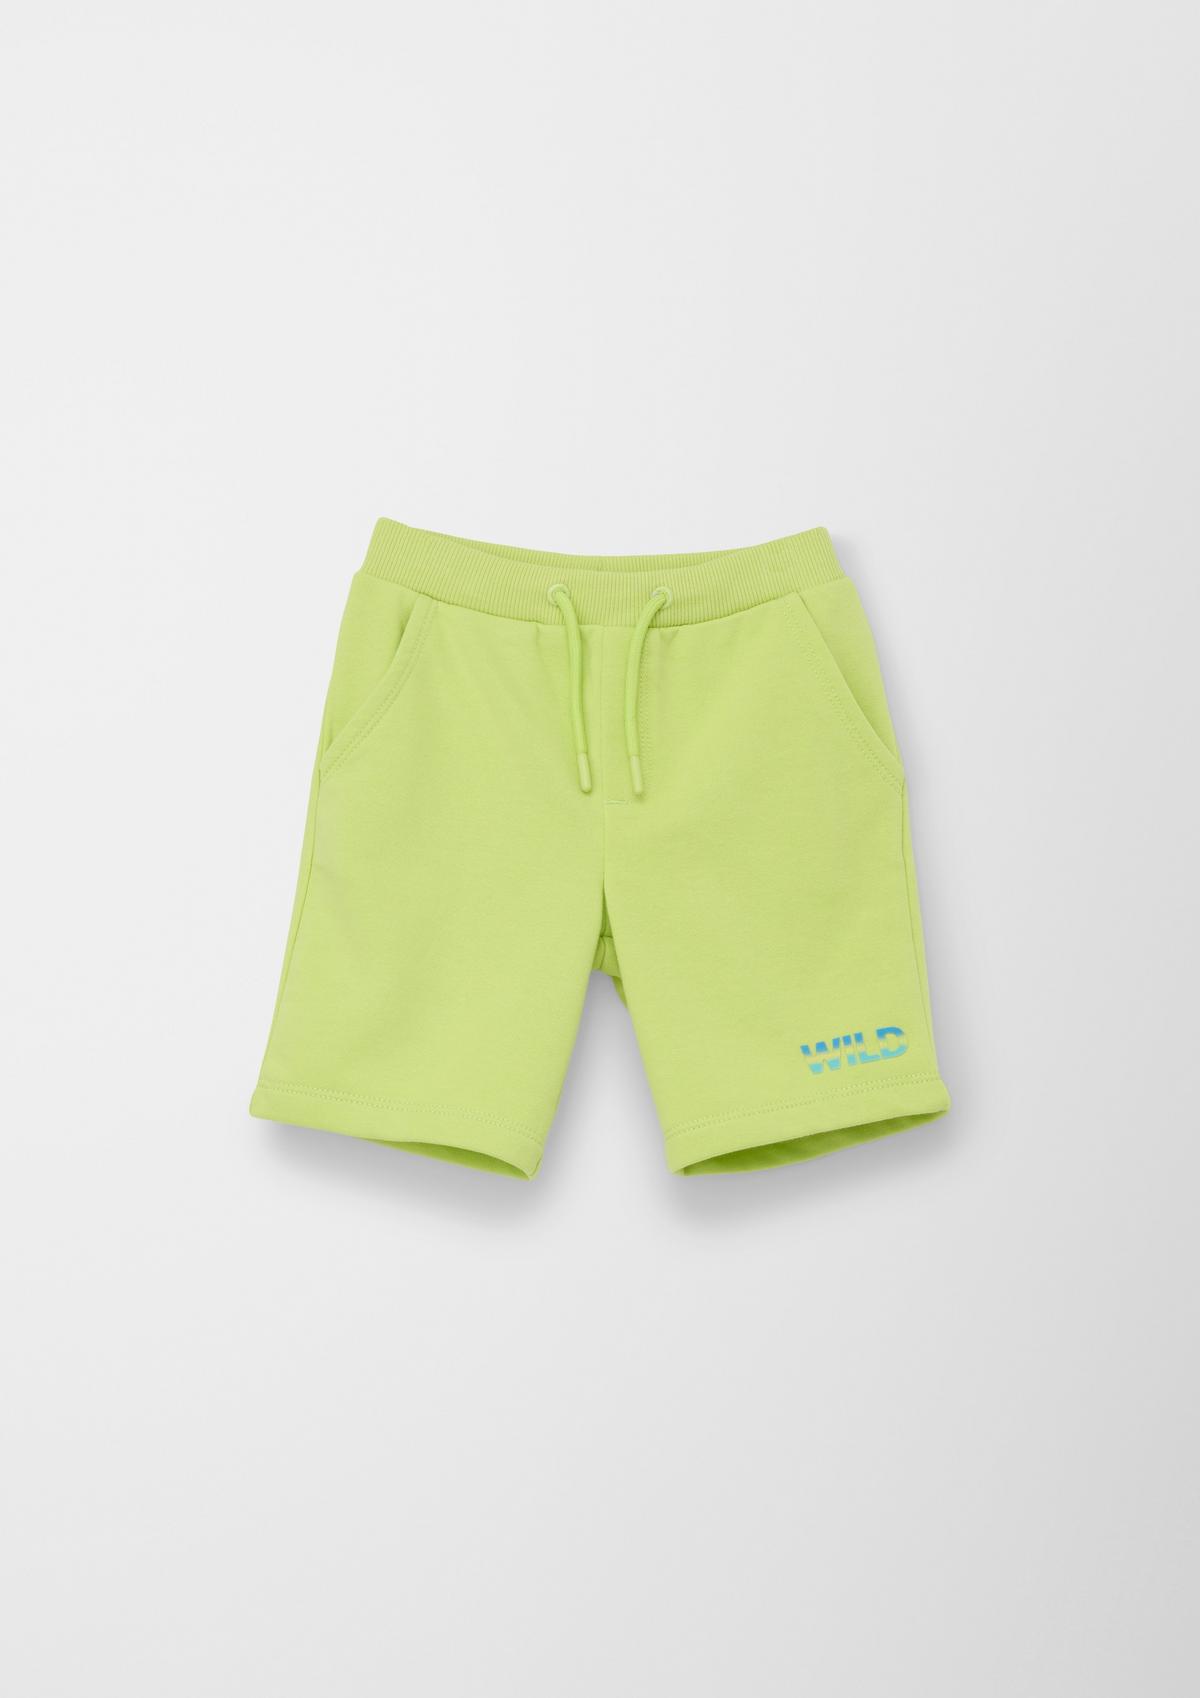 shorts and for teens Bermuda Find online boys